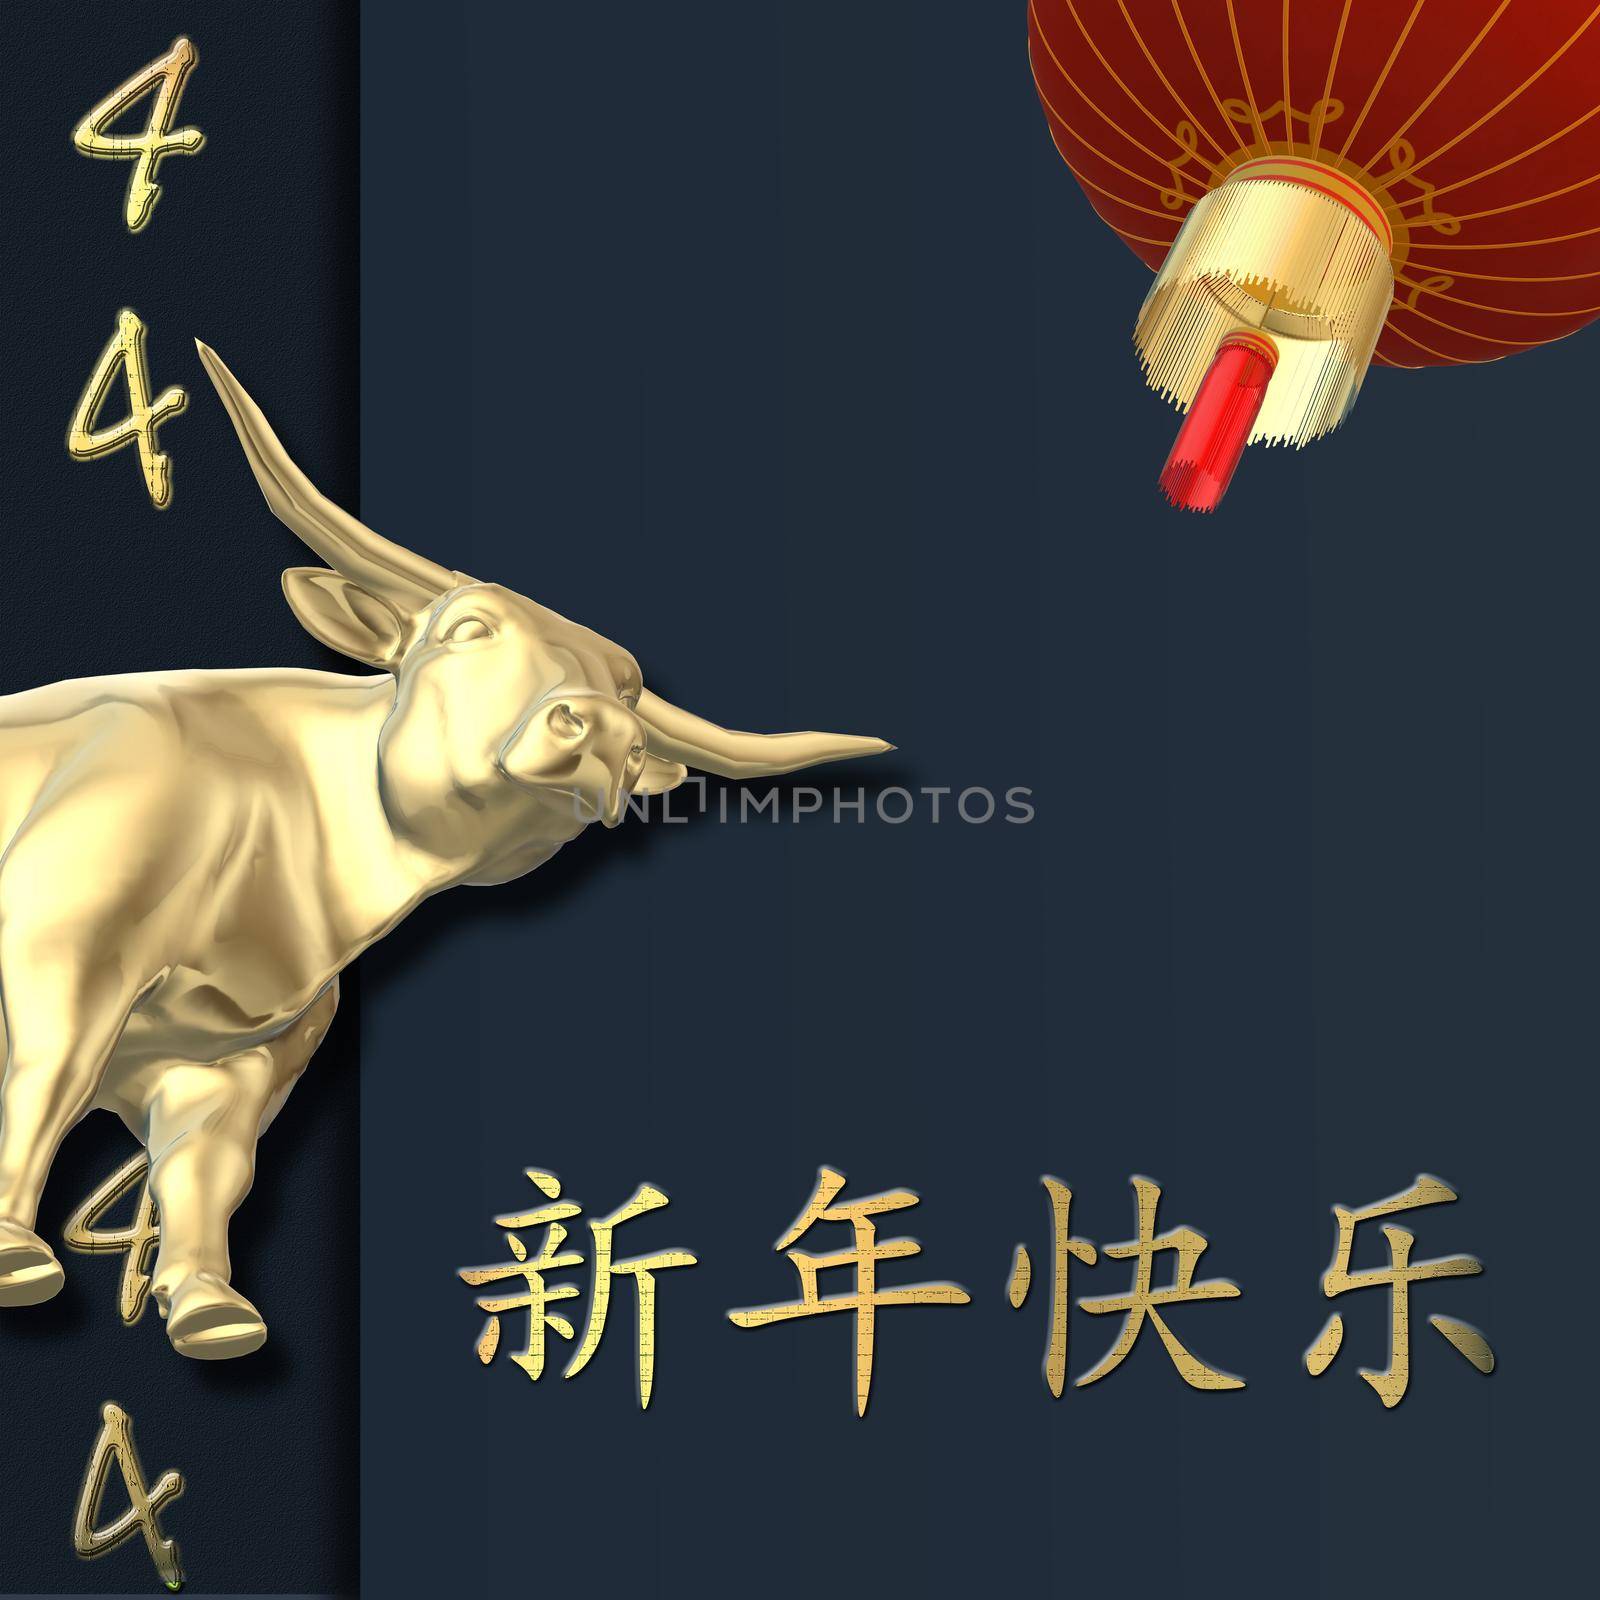 2021 Chinese new year, gold ox, lucky number 4, lantern on blue background. Gold text Happy Chinese New Year. Design for oriental 2021 new year card. 3D rendering